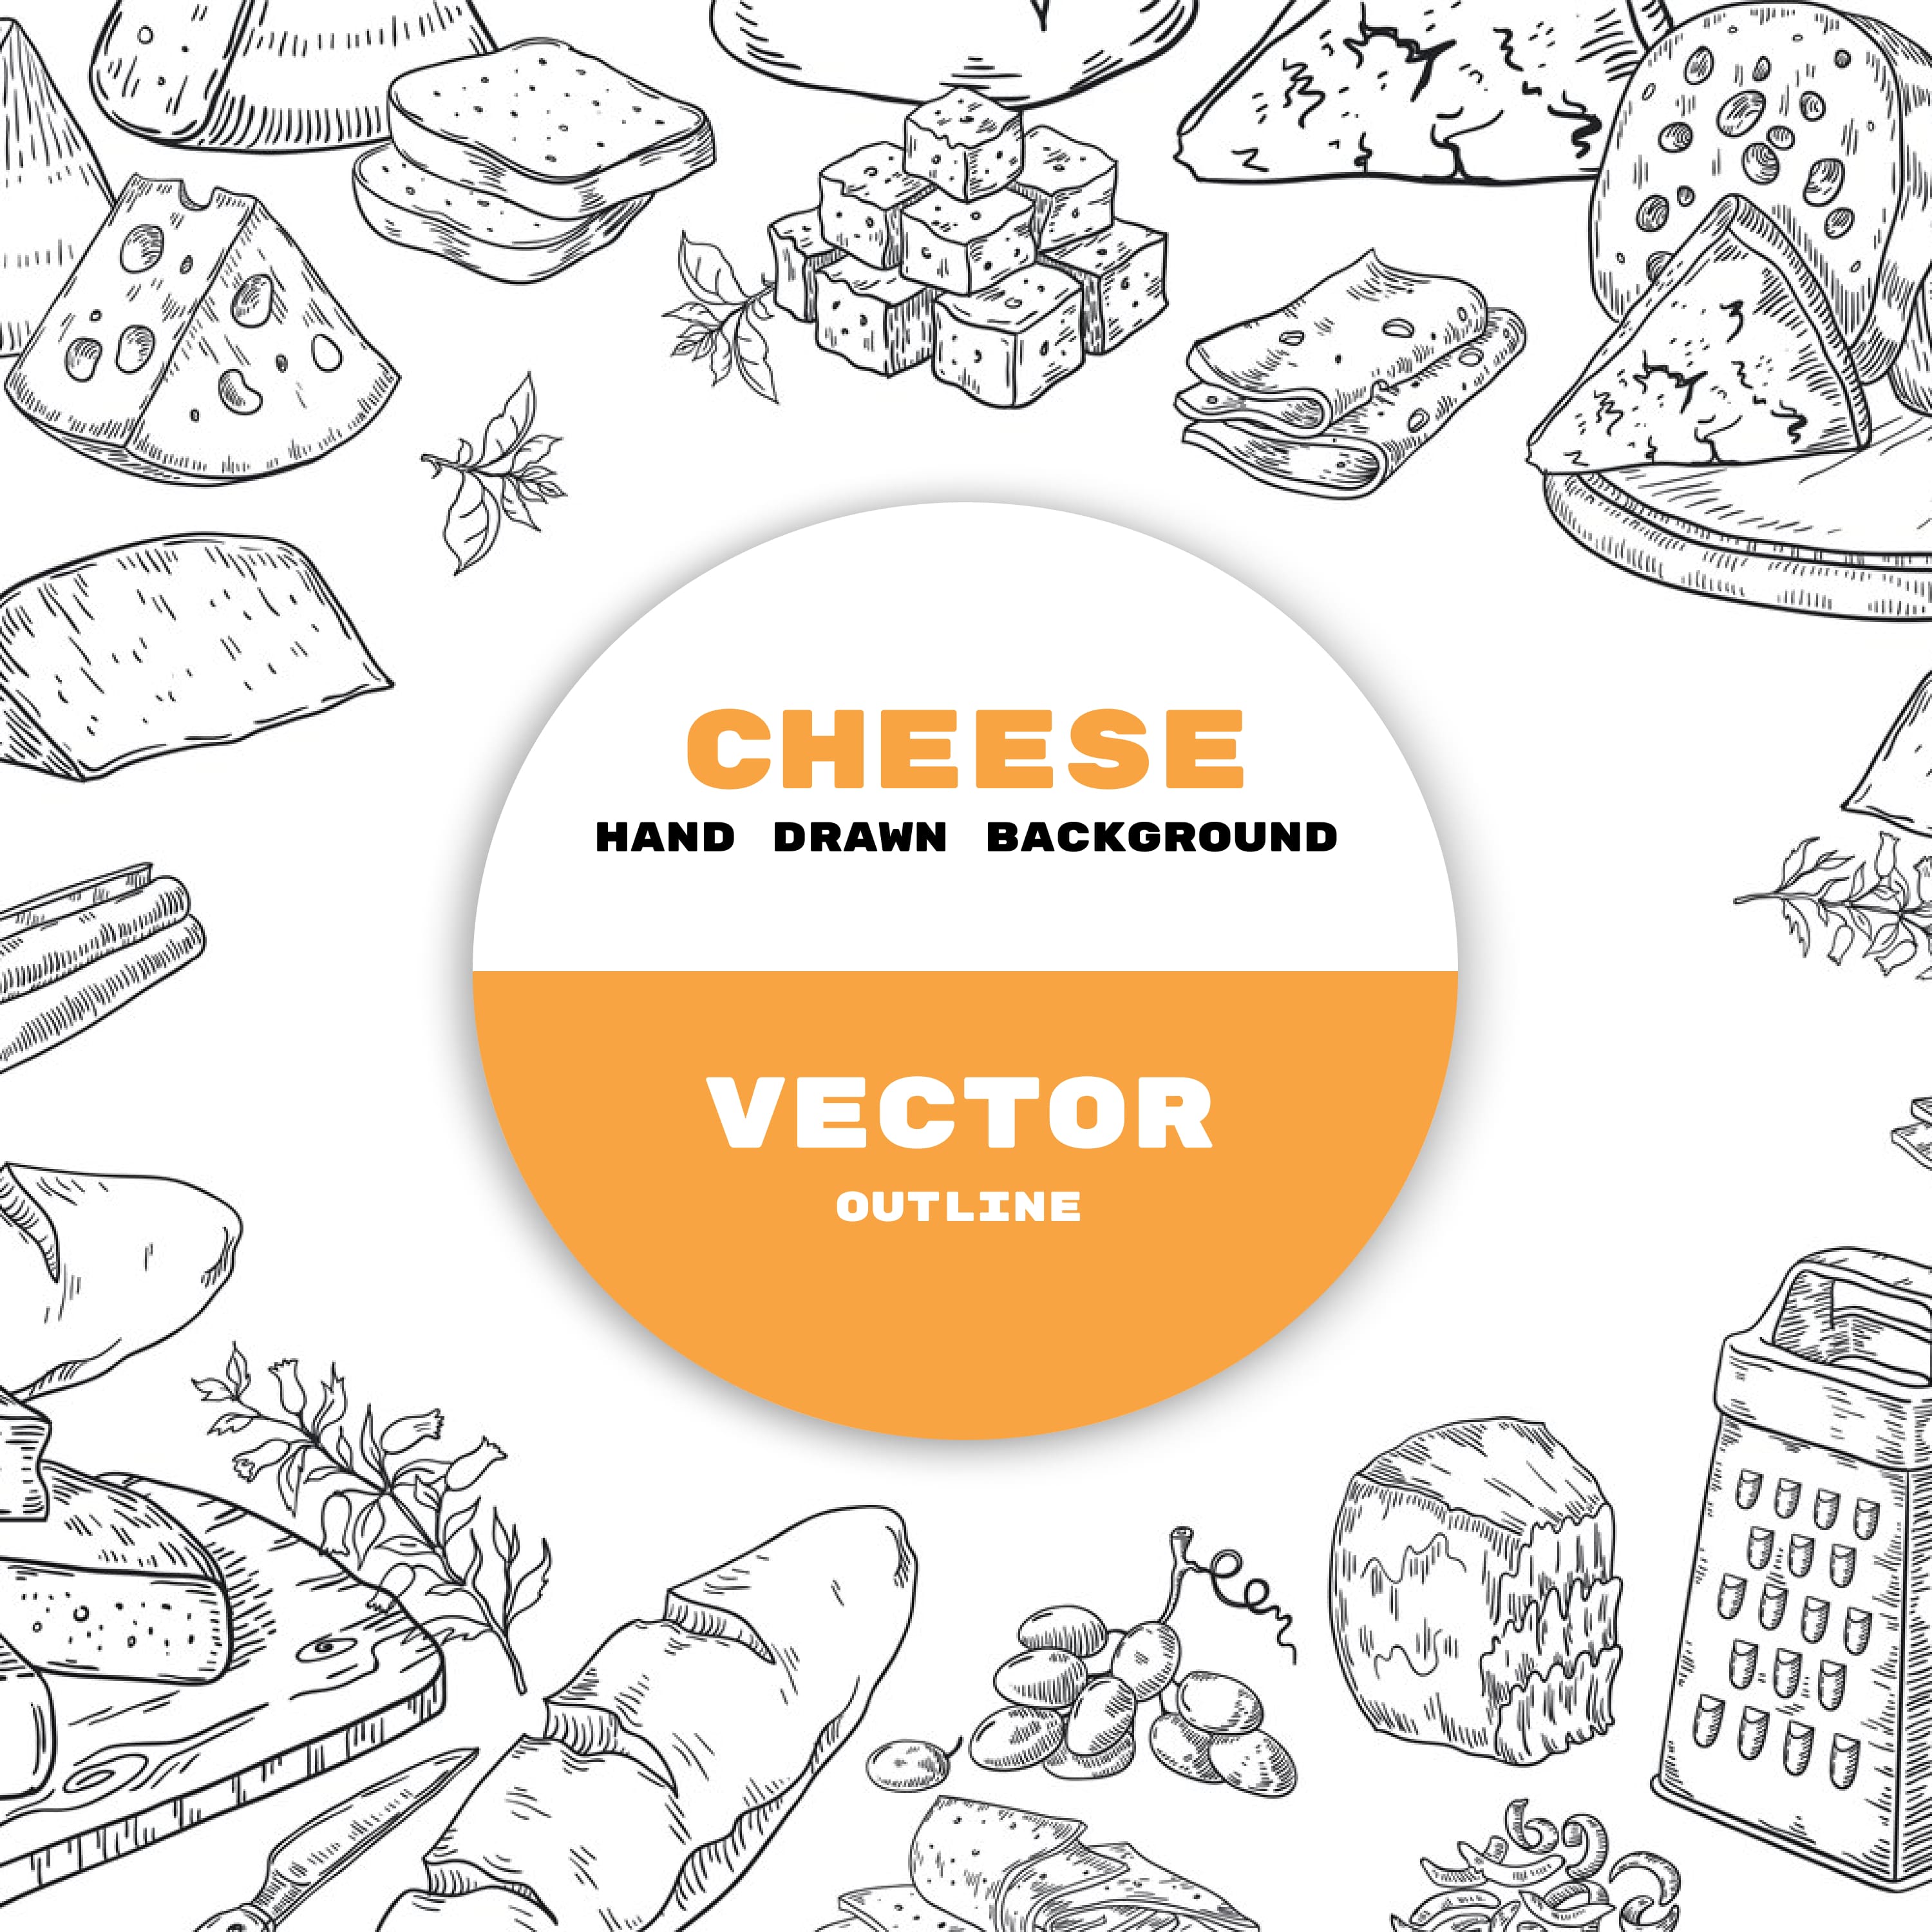 Collection of hand-drawn images of hard cheese and Italian snacks.